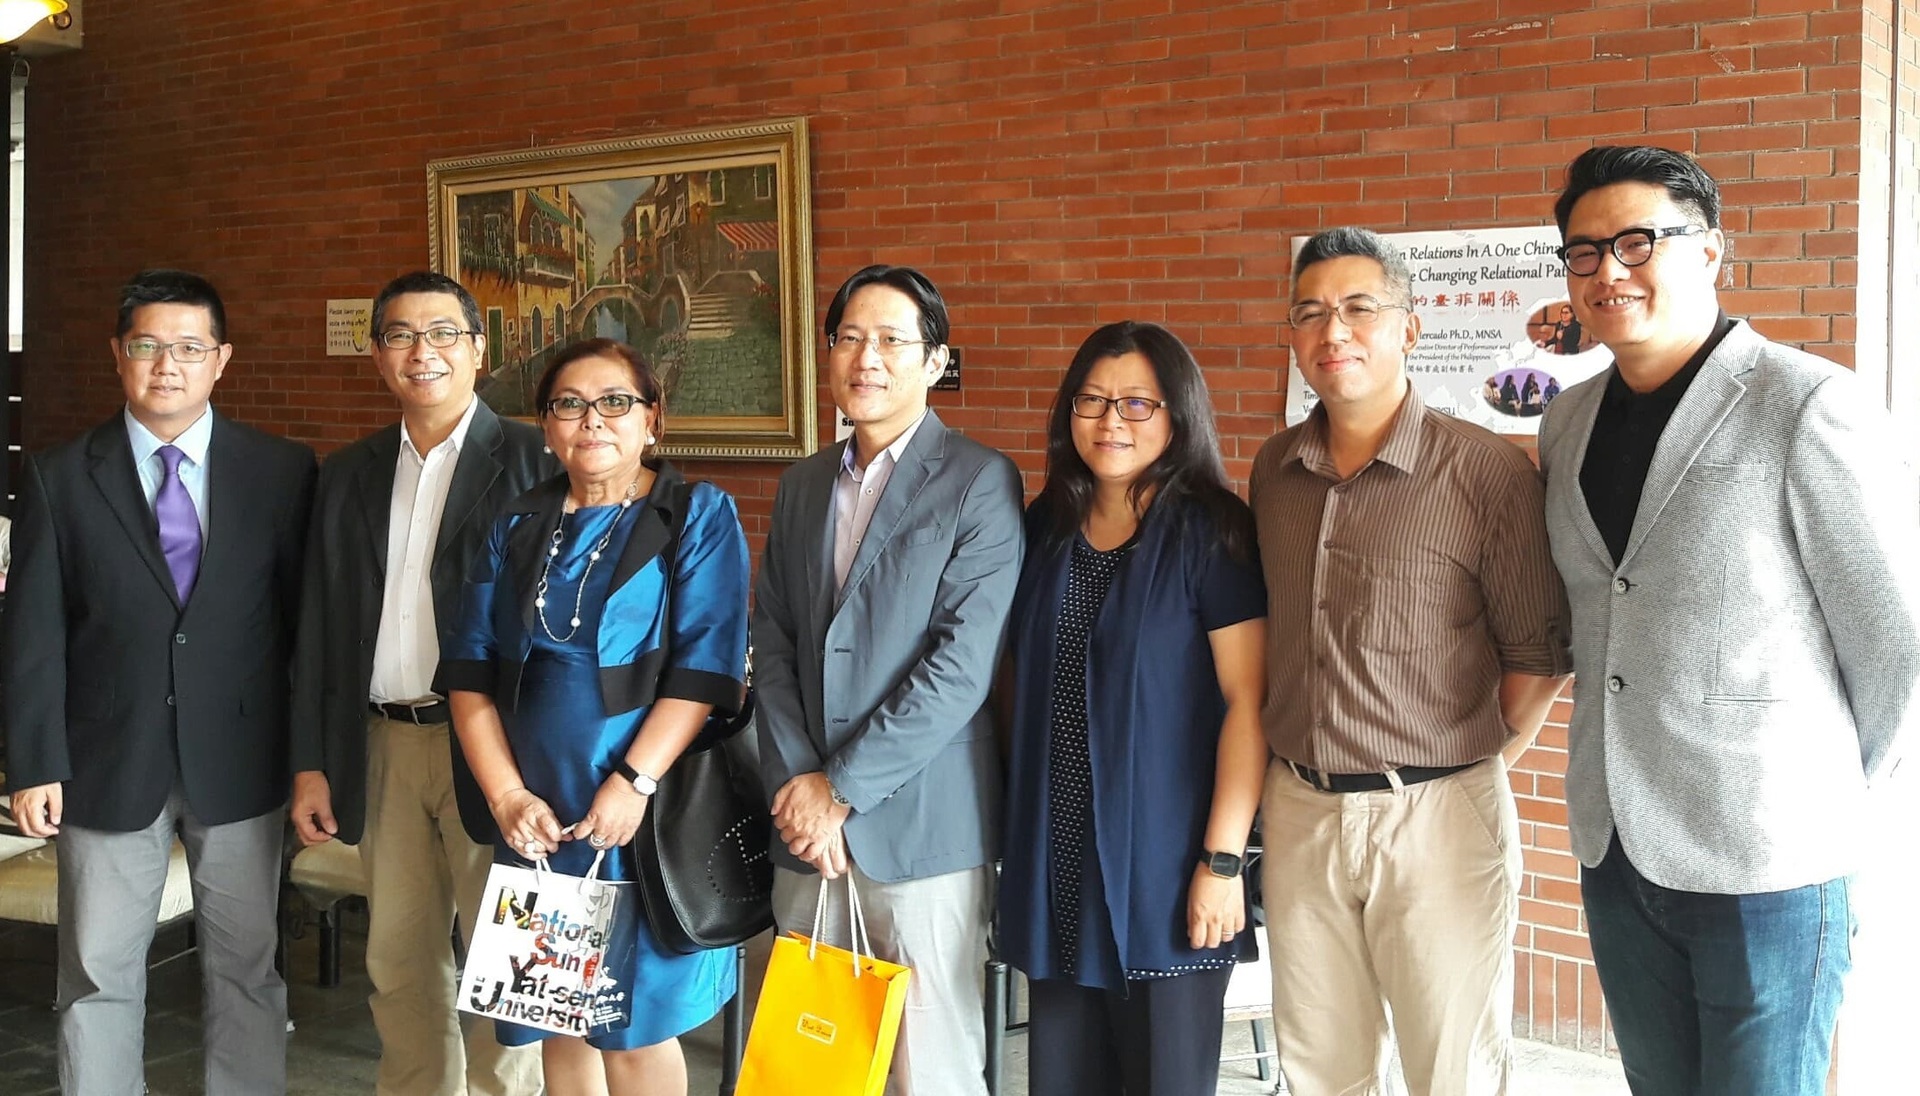 From left to right, Political Science Prof. Titus C. Chen, Dr. Chih-Wen Kuo, Dr. Gloria Jumamil-Mercado, Dean of Social Scineces Dr. Chyi-Lu Jang, Asia-Pacific Affairs Prof. Kai-yin Allison Haga, Center for Southeast Asian Studies Dr. Amador Peleo, Asia-Pacific Affairs Dr. Chia-Hao Hsu